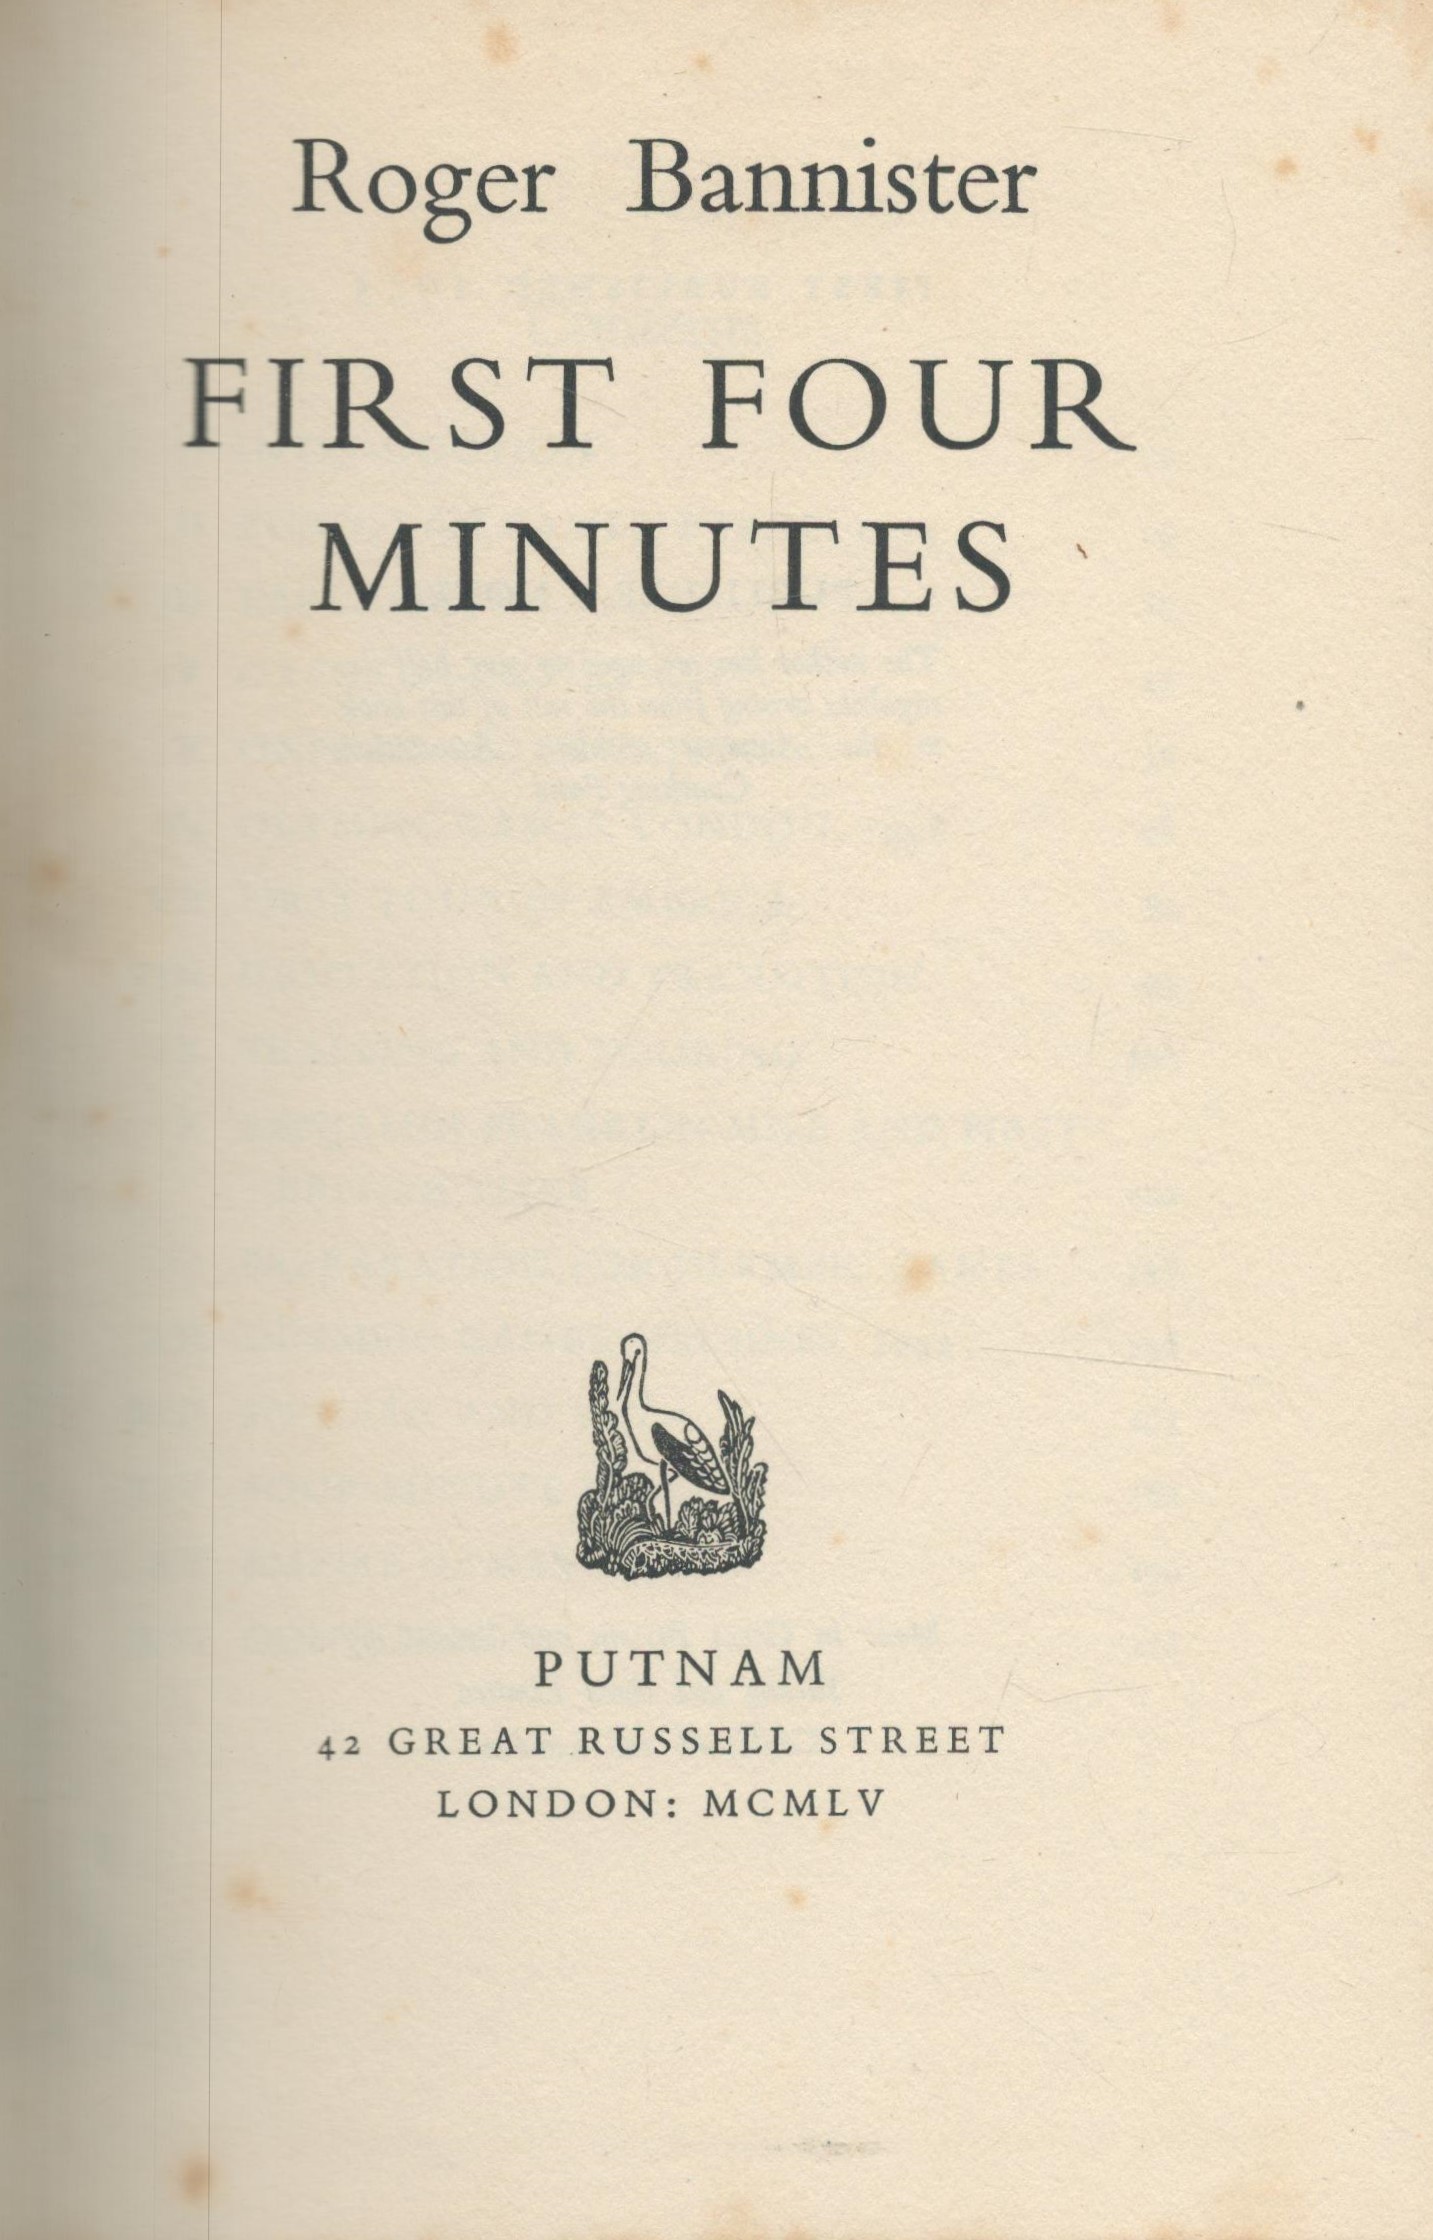 First Four Minutes by Roger Bannister. Published by Putnam, London. 1st edition 1955. 224 pages. - Image 2 of 3